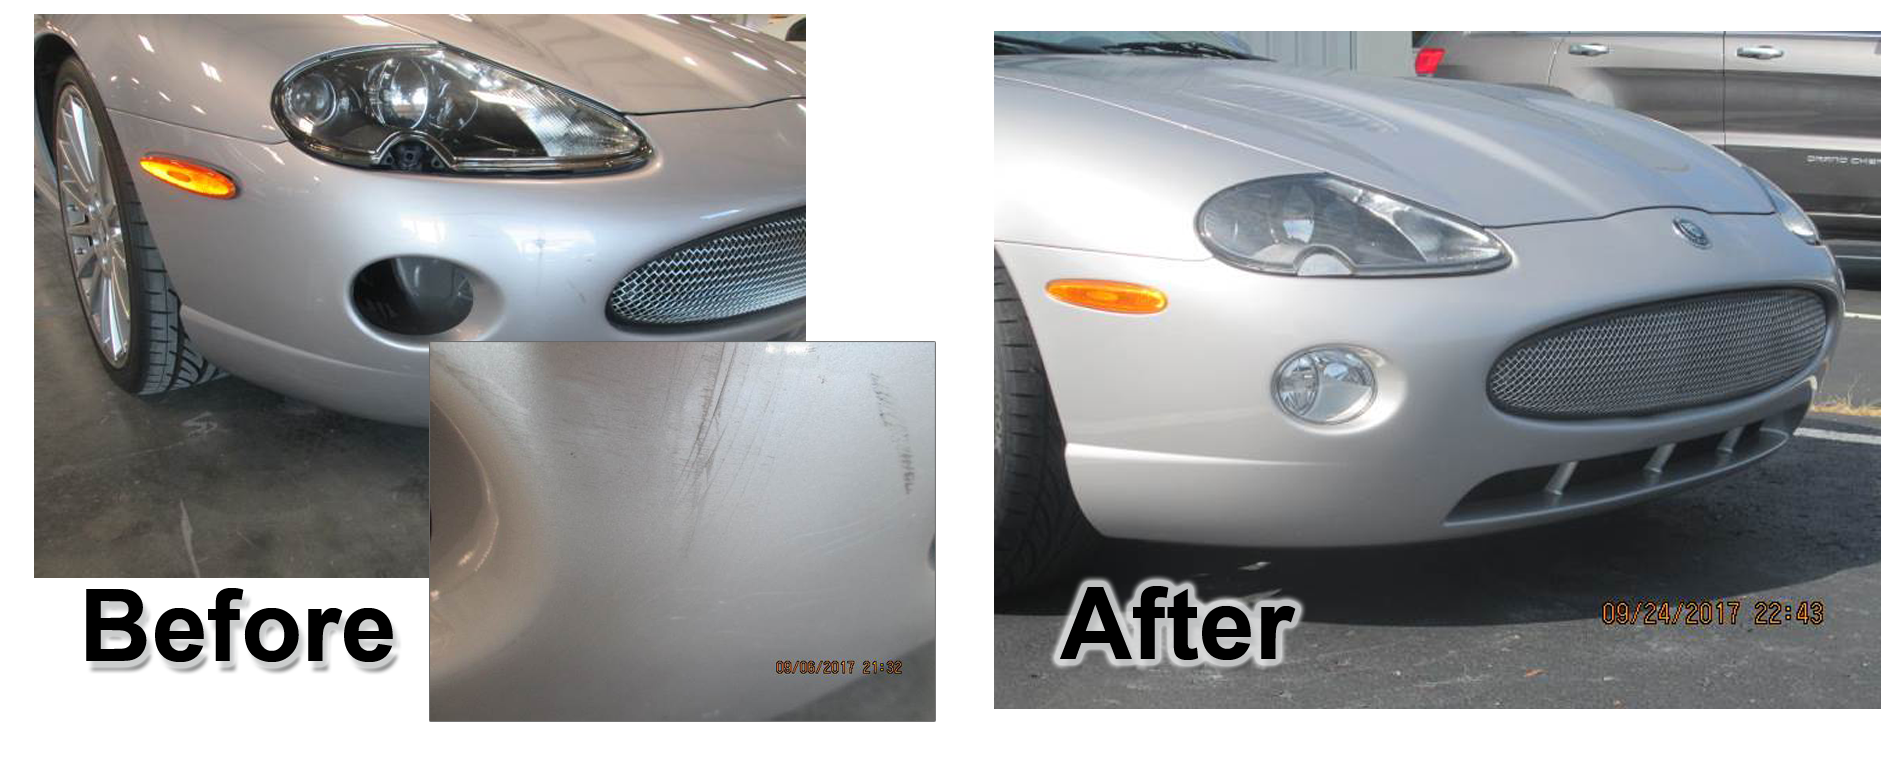 Before and After Jaguar Picture